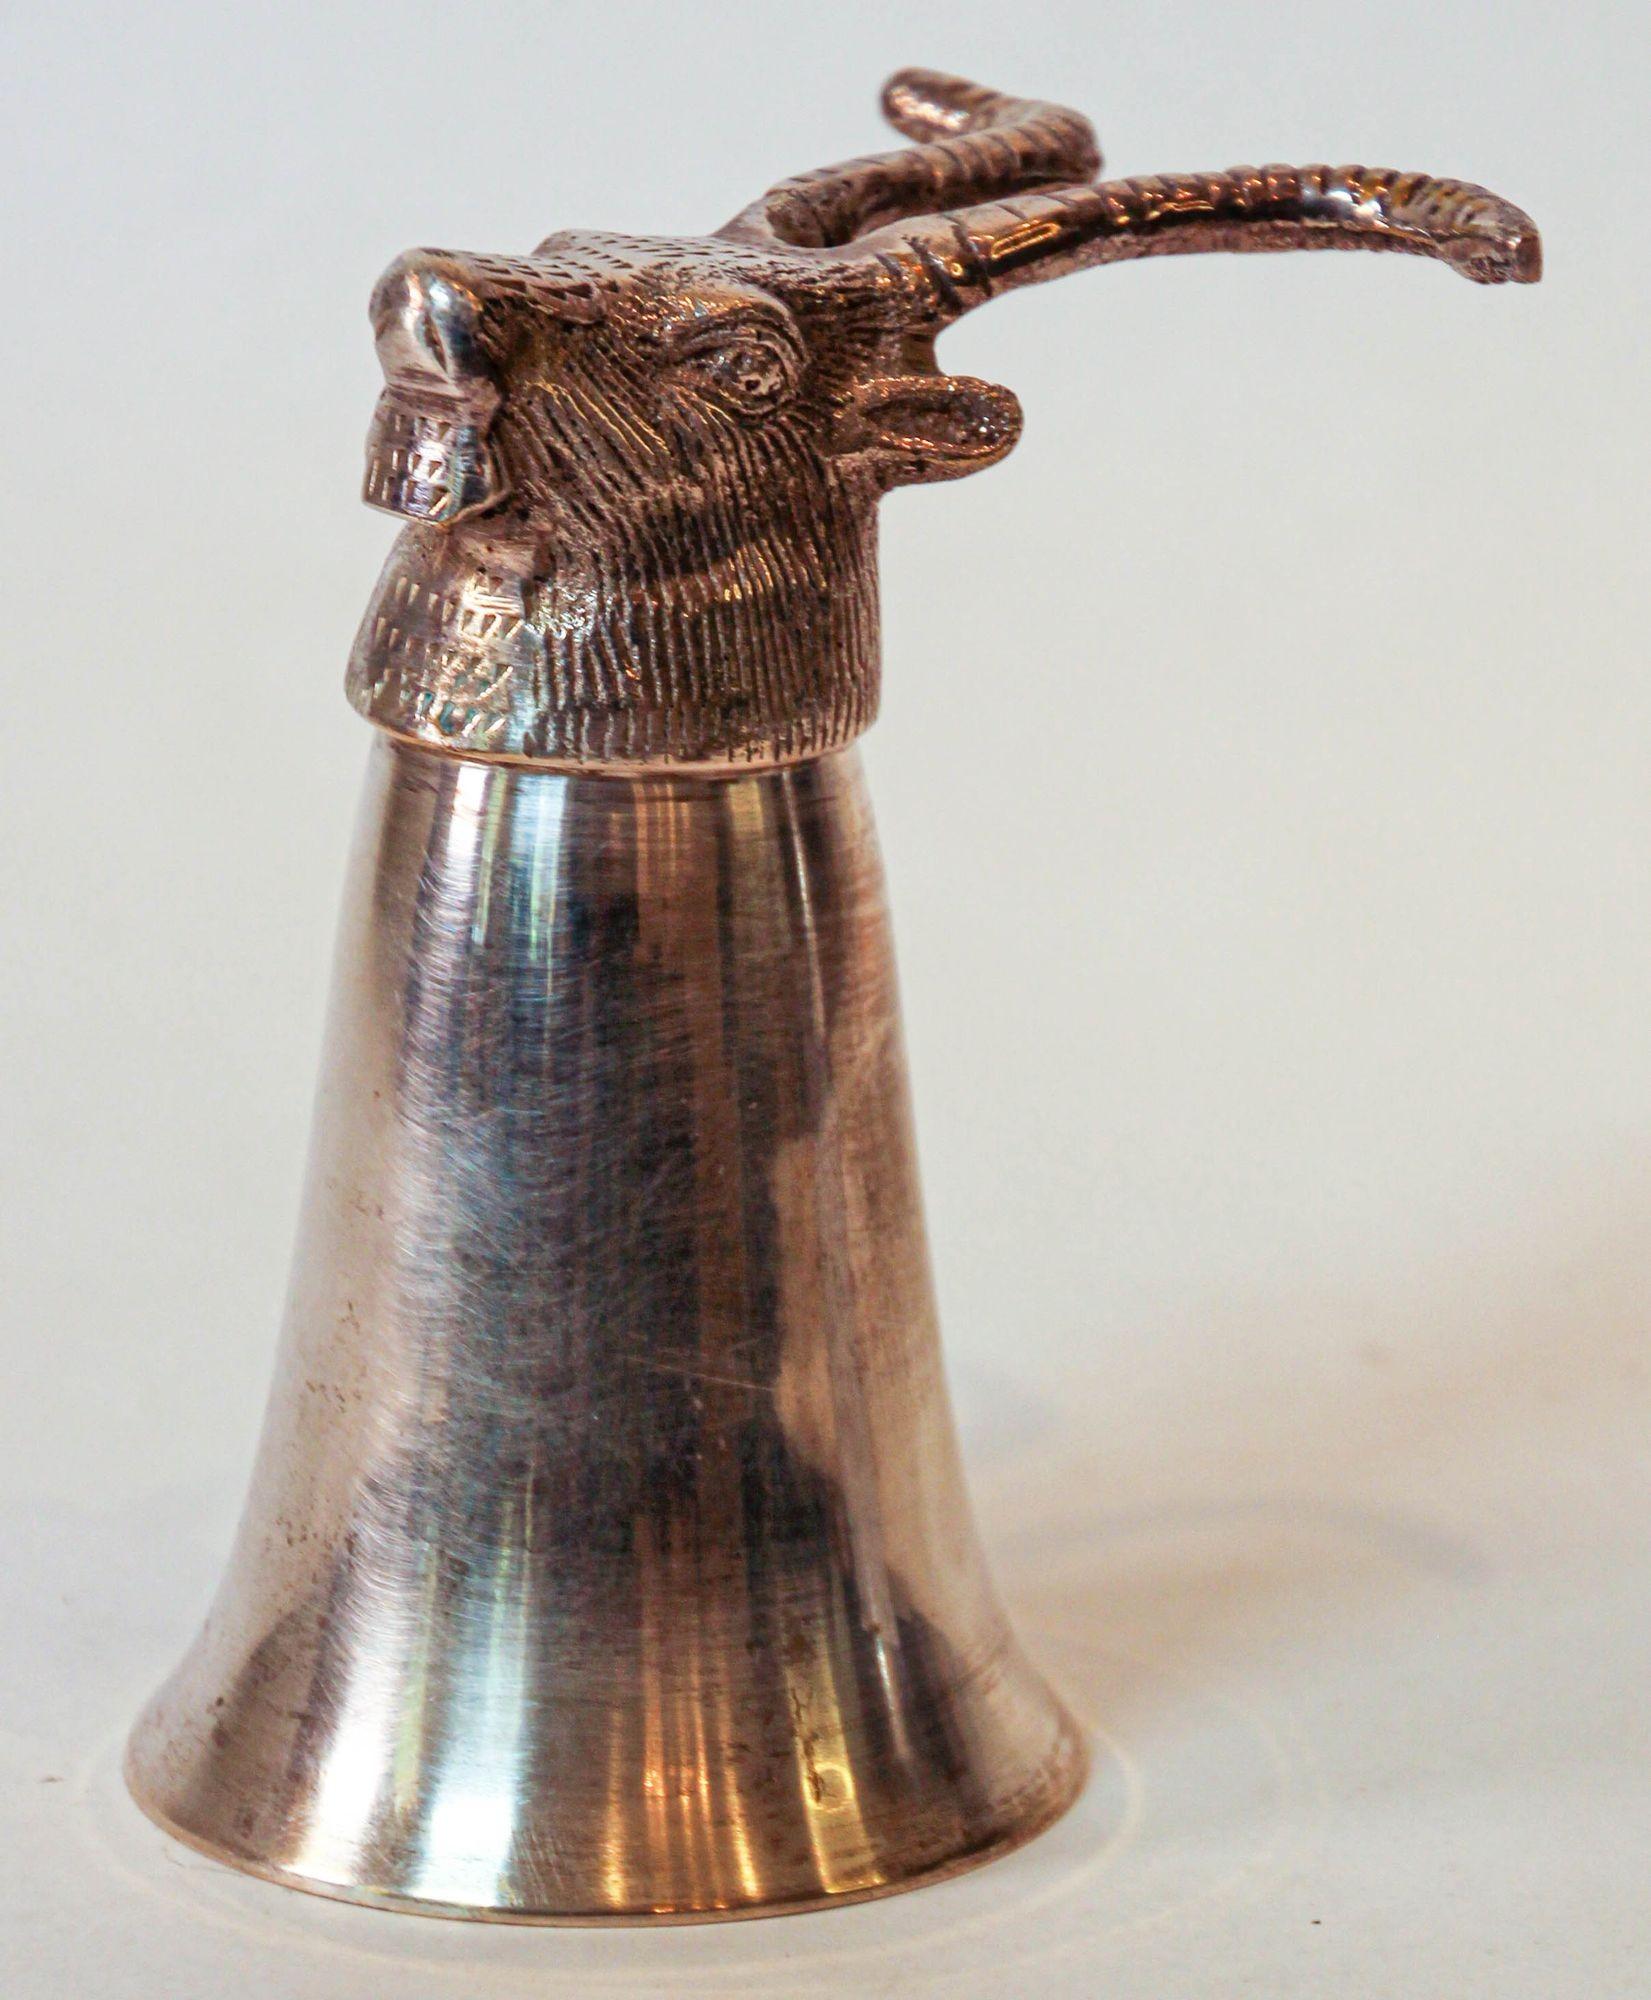 Cast Silver Stirrup Cup Goblet Antelope Head Hunting Equestrian Barware Decor 1970s For Sale